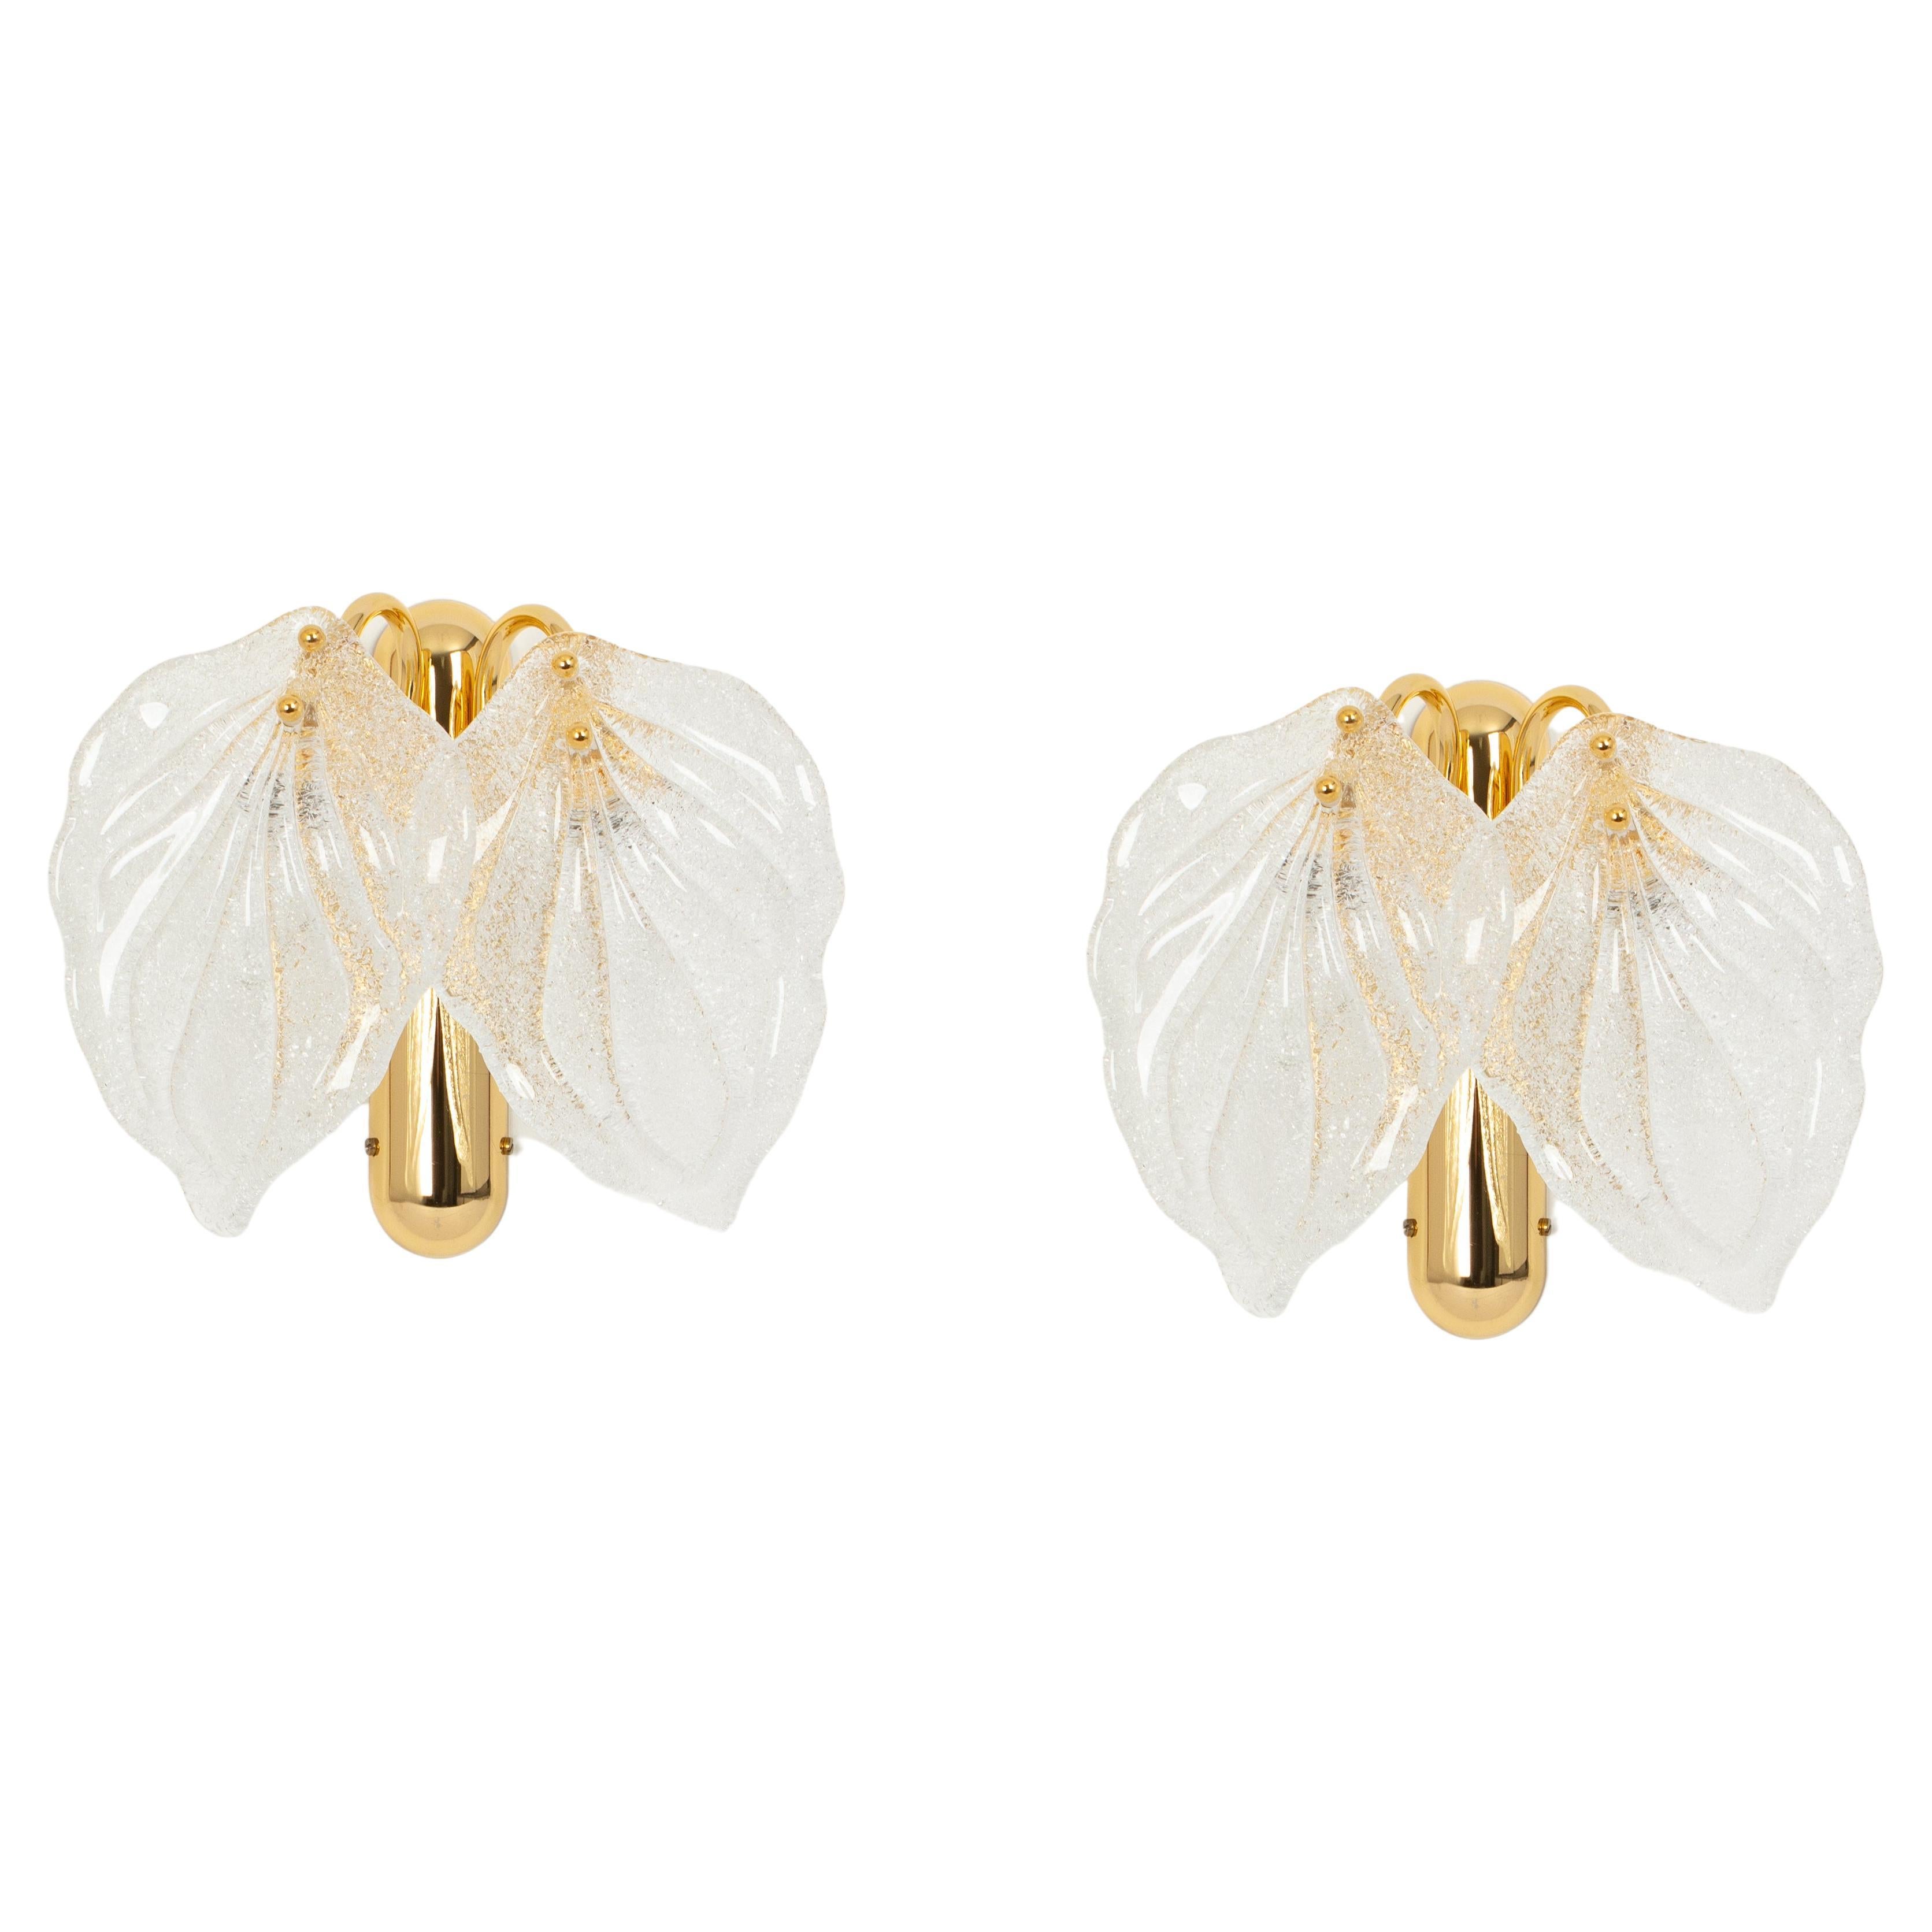 Pair of Large Stunning Murano Glass Wall Sconce by Novaresi, Italy, 1970s